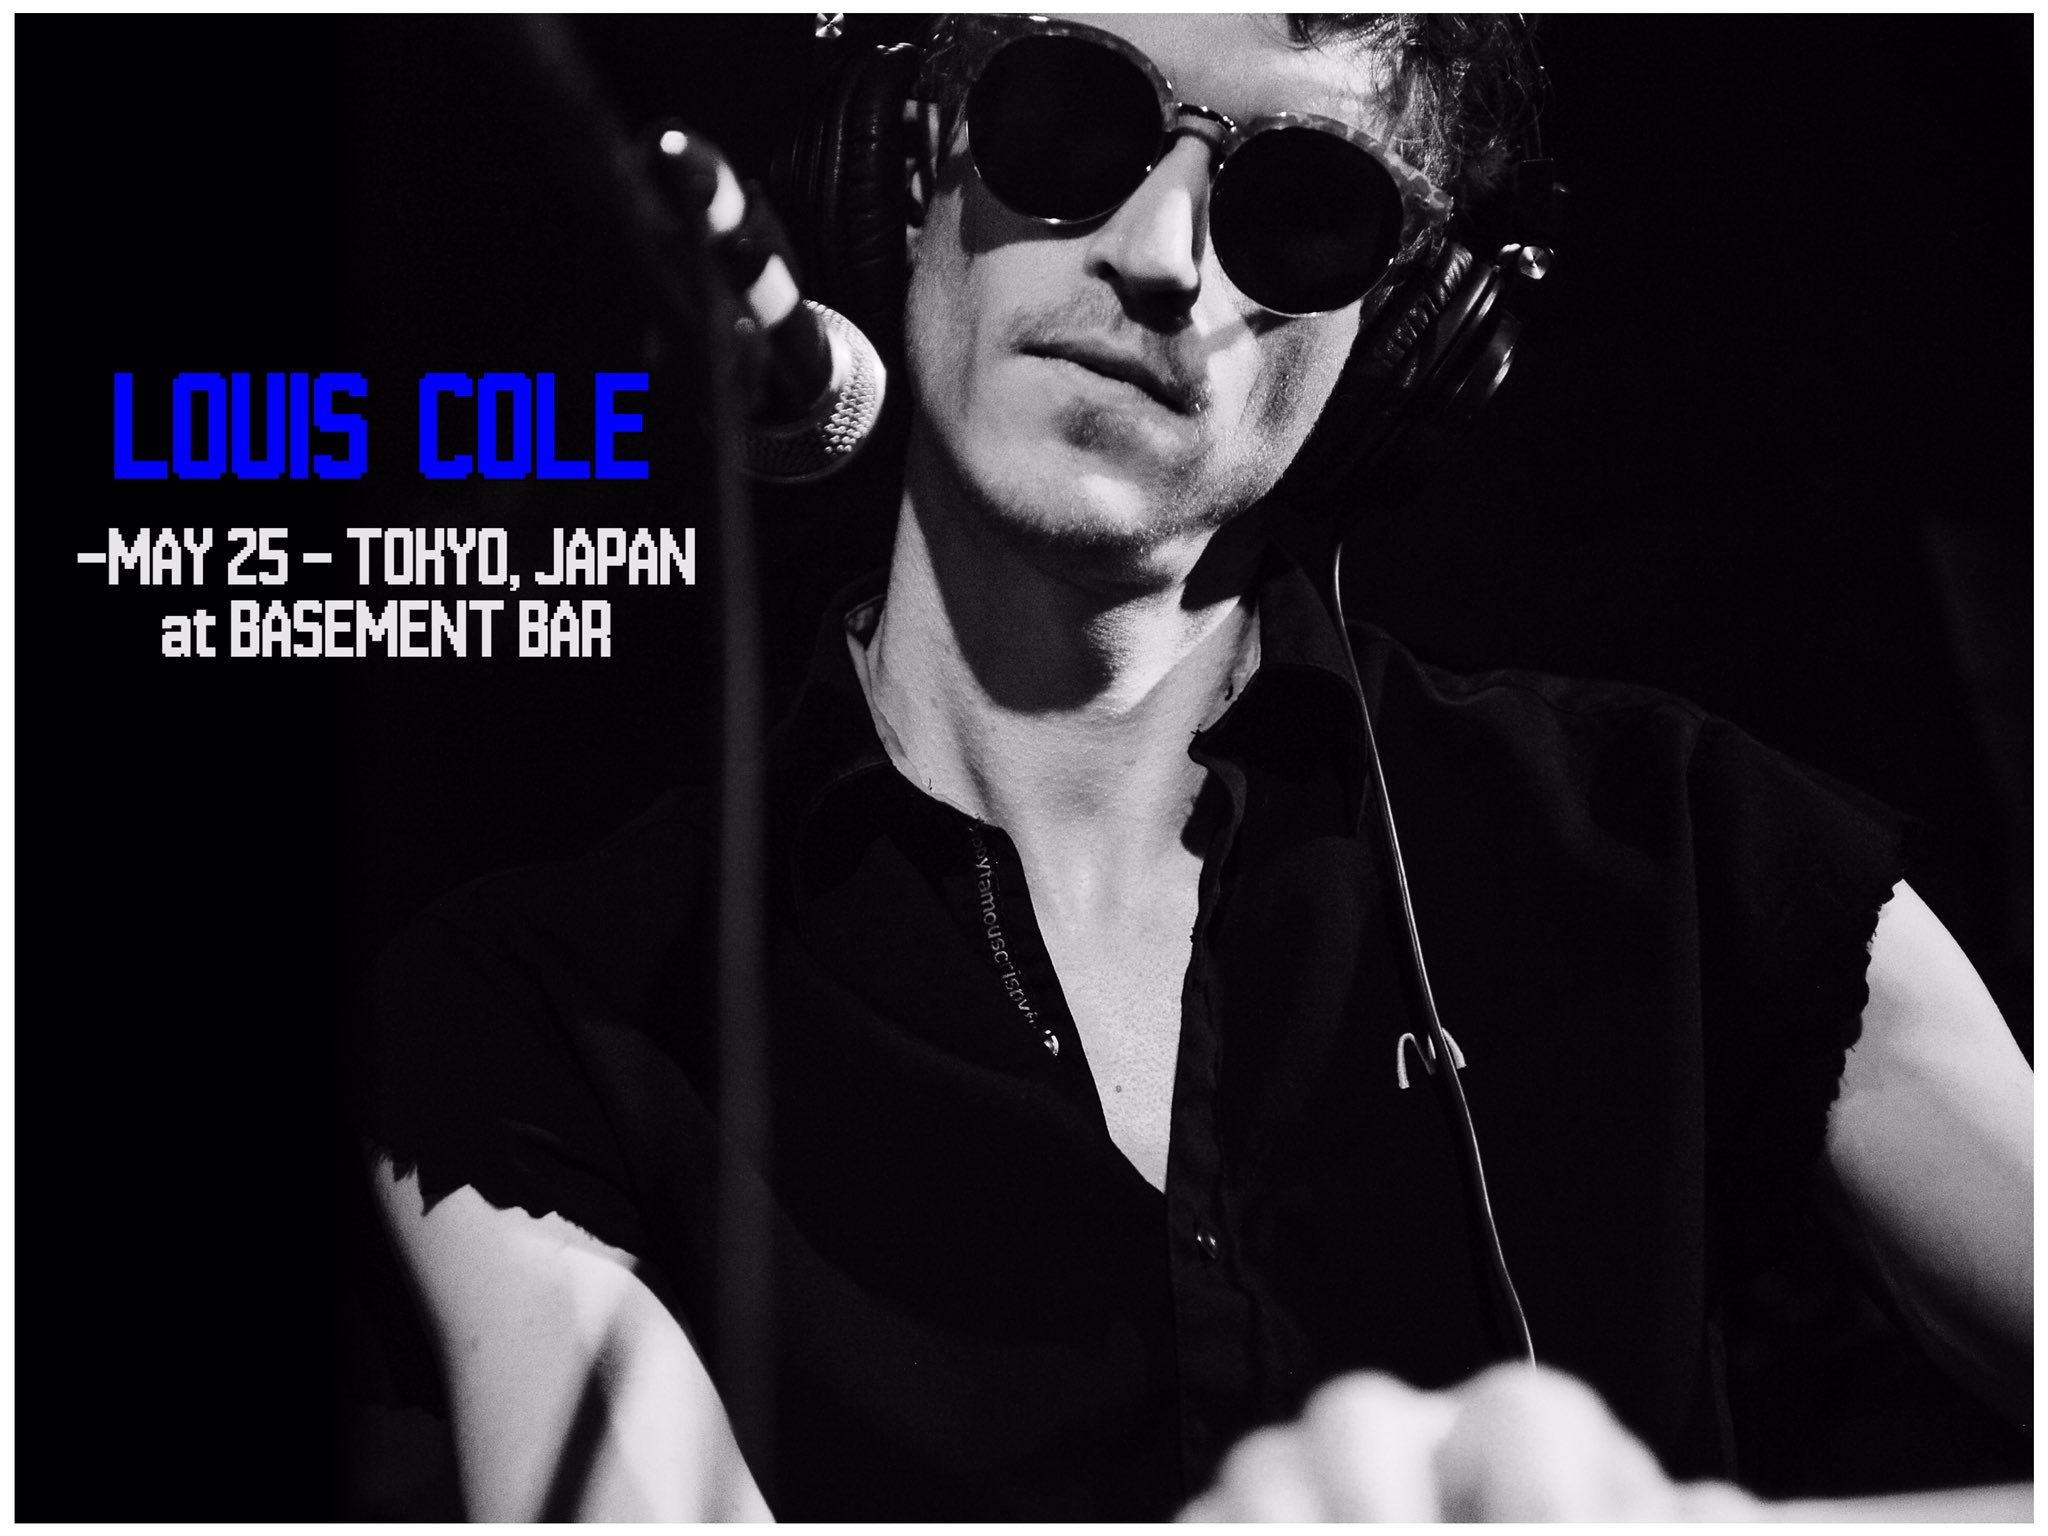 Louis Cole on X: #louiscole #Japan #searing #hot